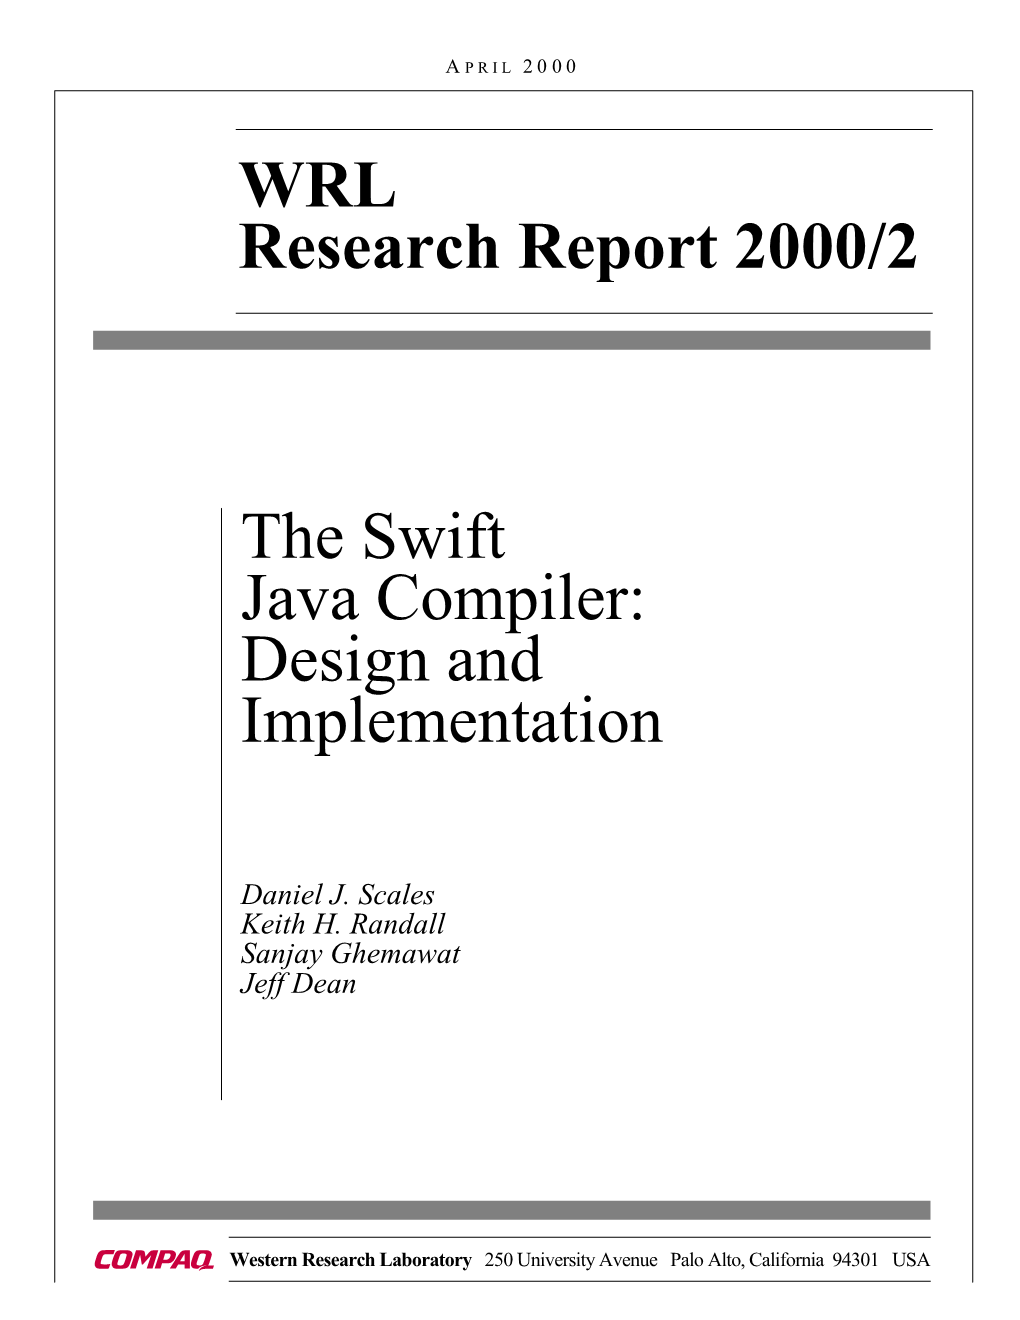 WRL Research Report 2000/2 the Swift Java Compiler: Design and Implementation